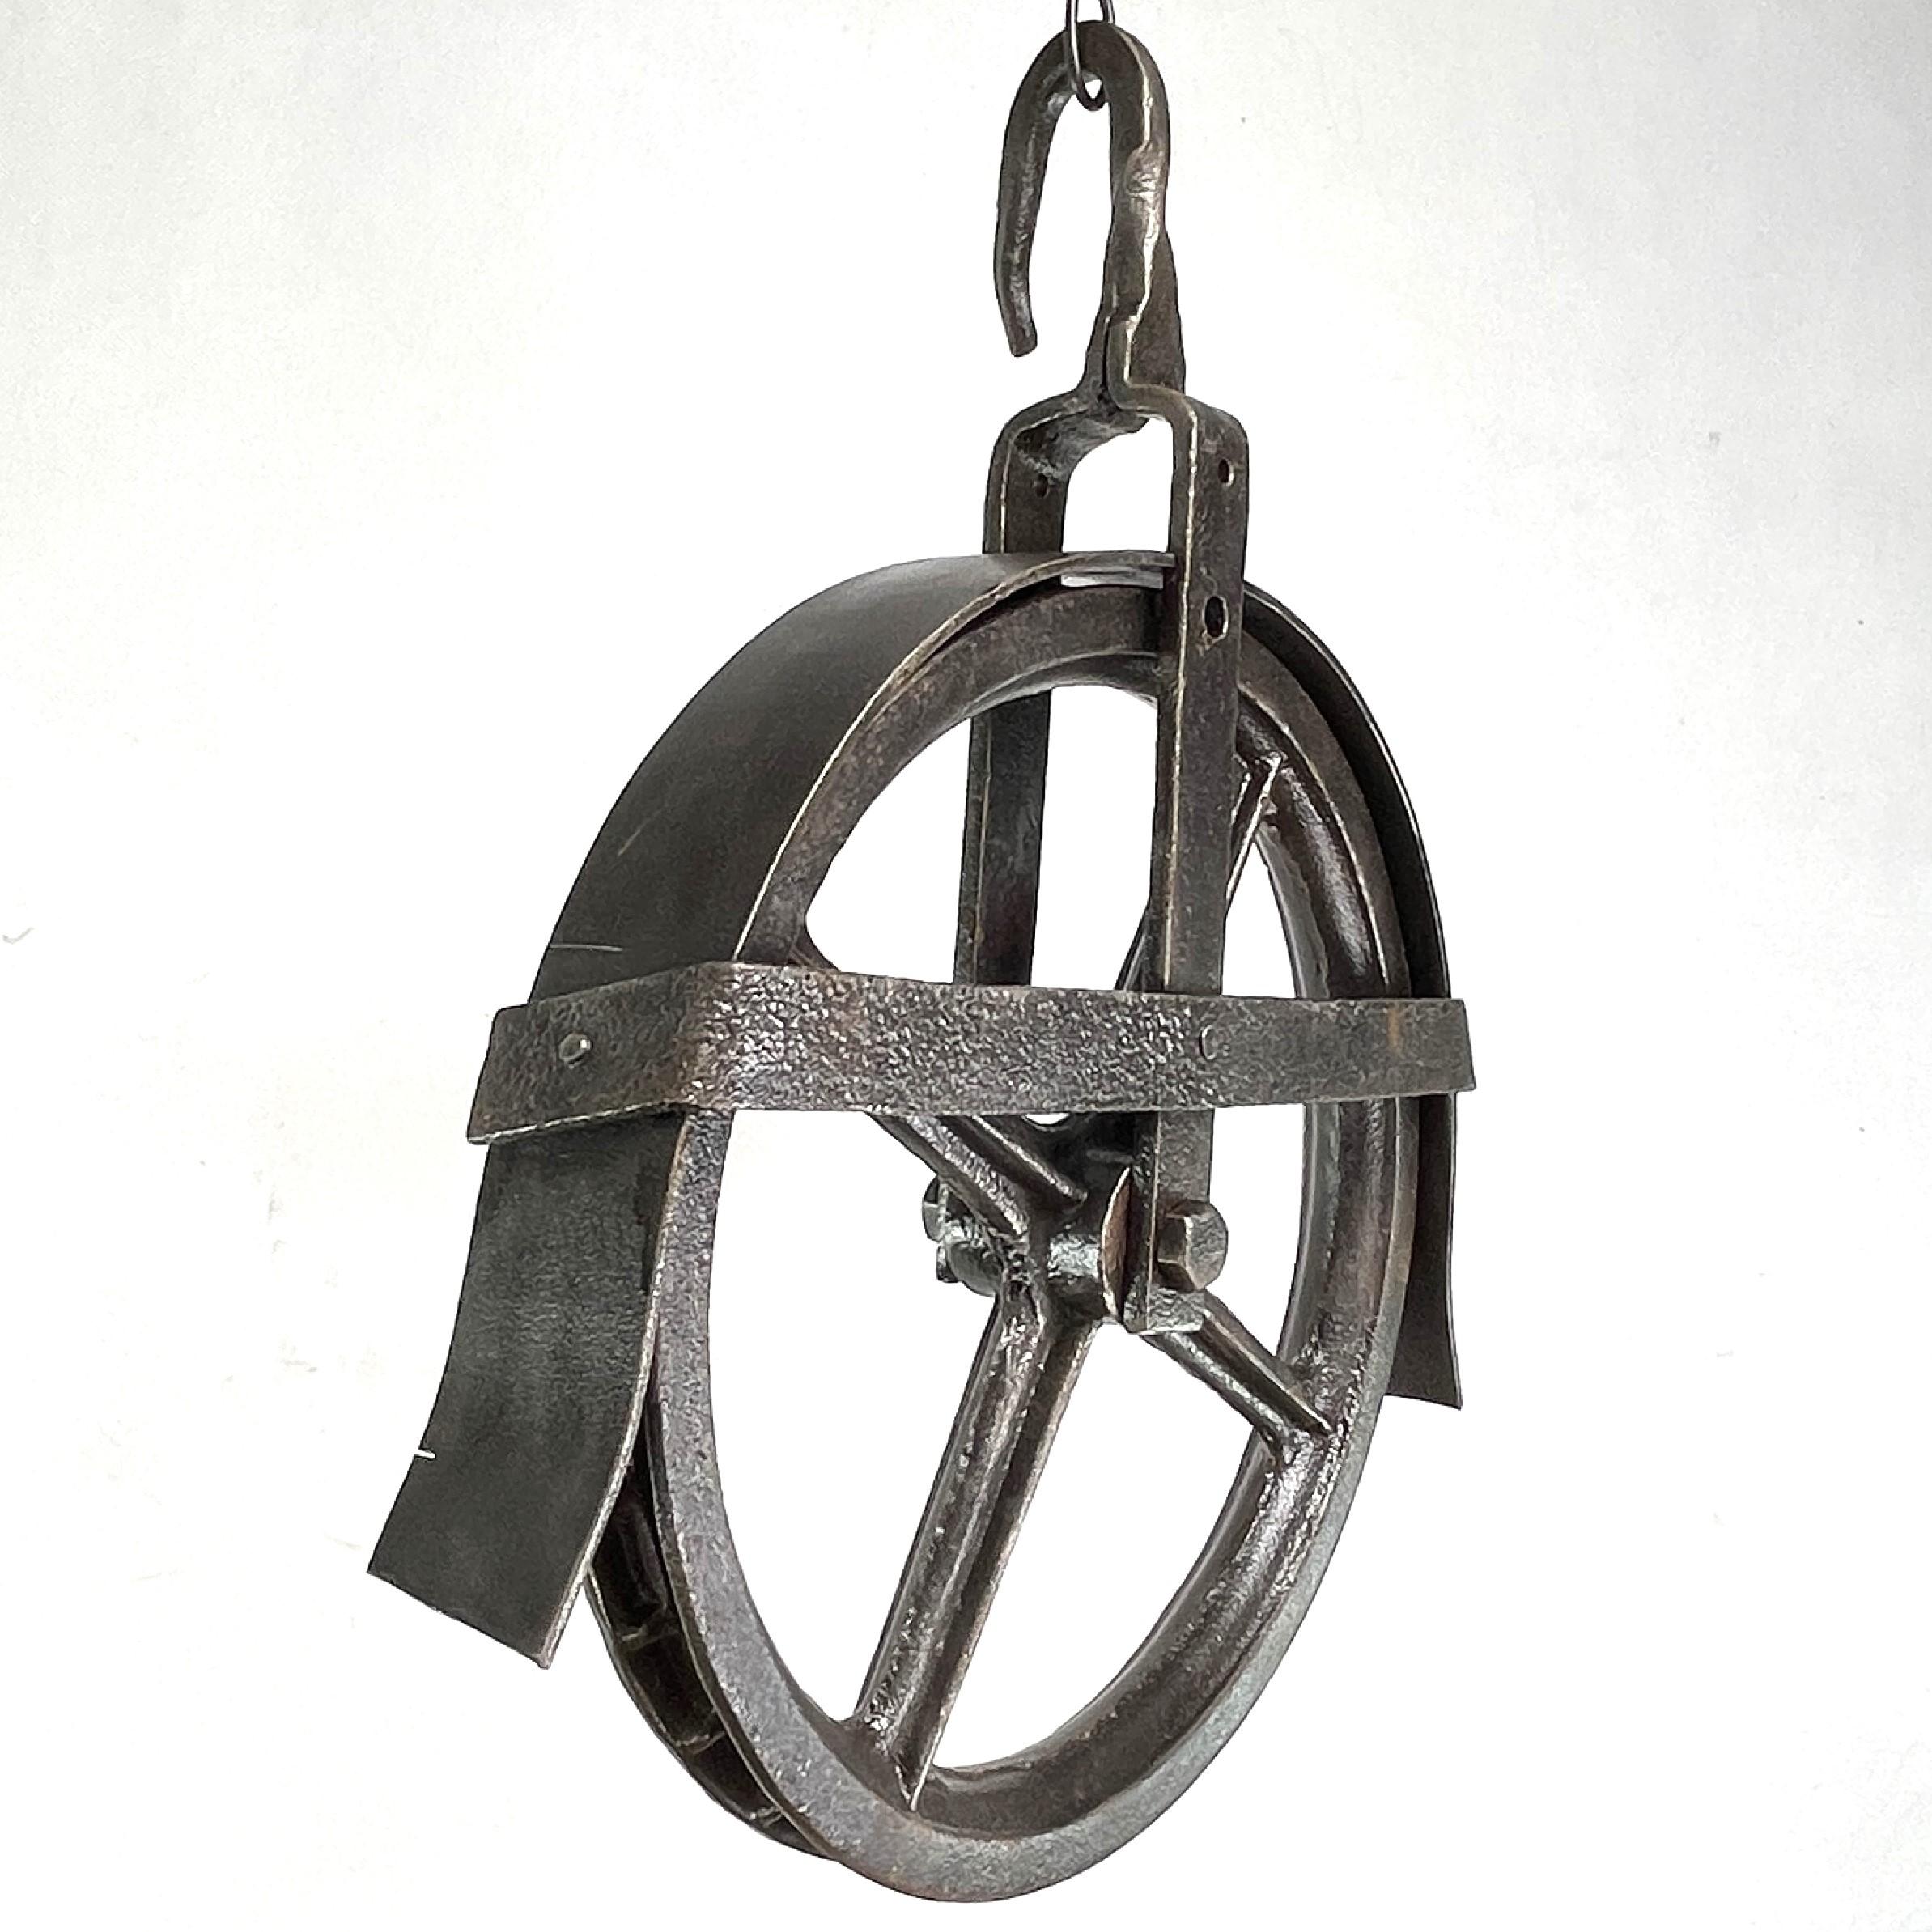 Old large Pulley Industrial Design - 1950/60s

The old pulley (cable pull) in industrial design is an impressive piece of the past times. It combines the charm and sturdiness of the past industrial era. 

This iron pulley was once used by farmers